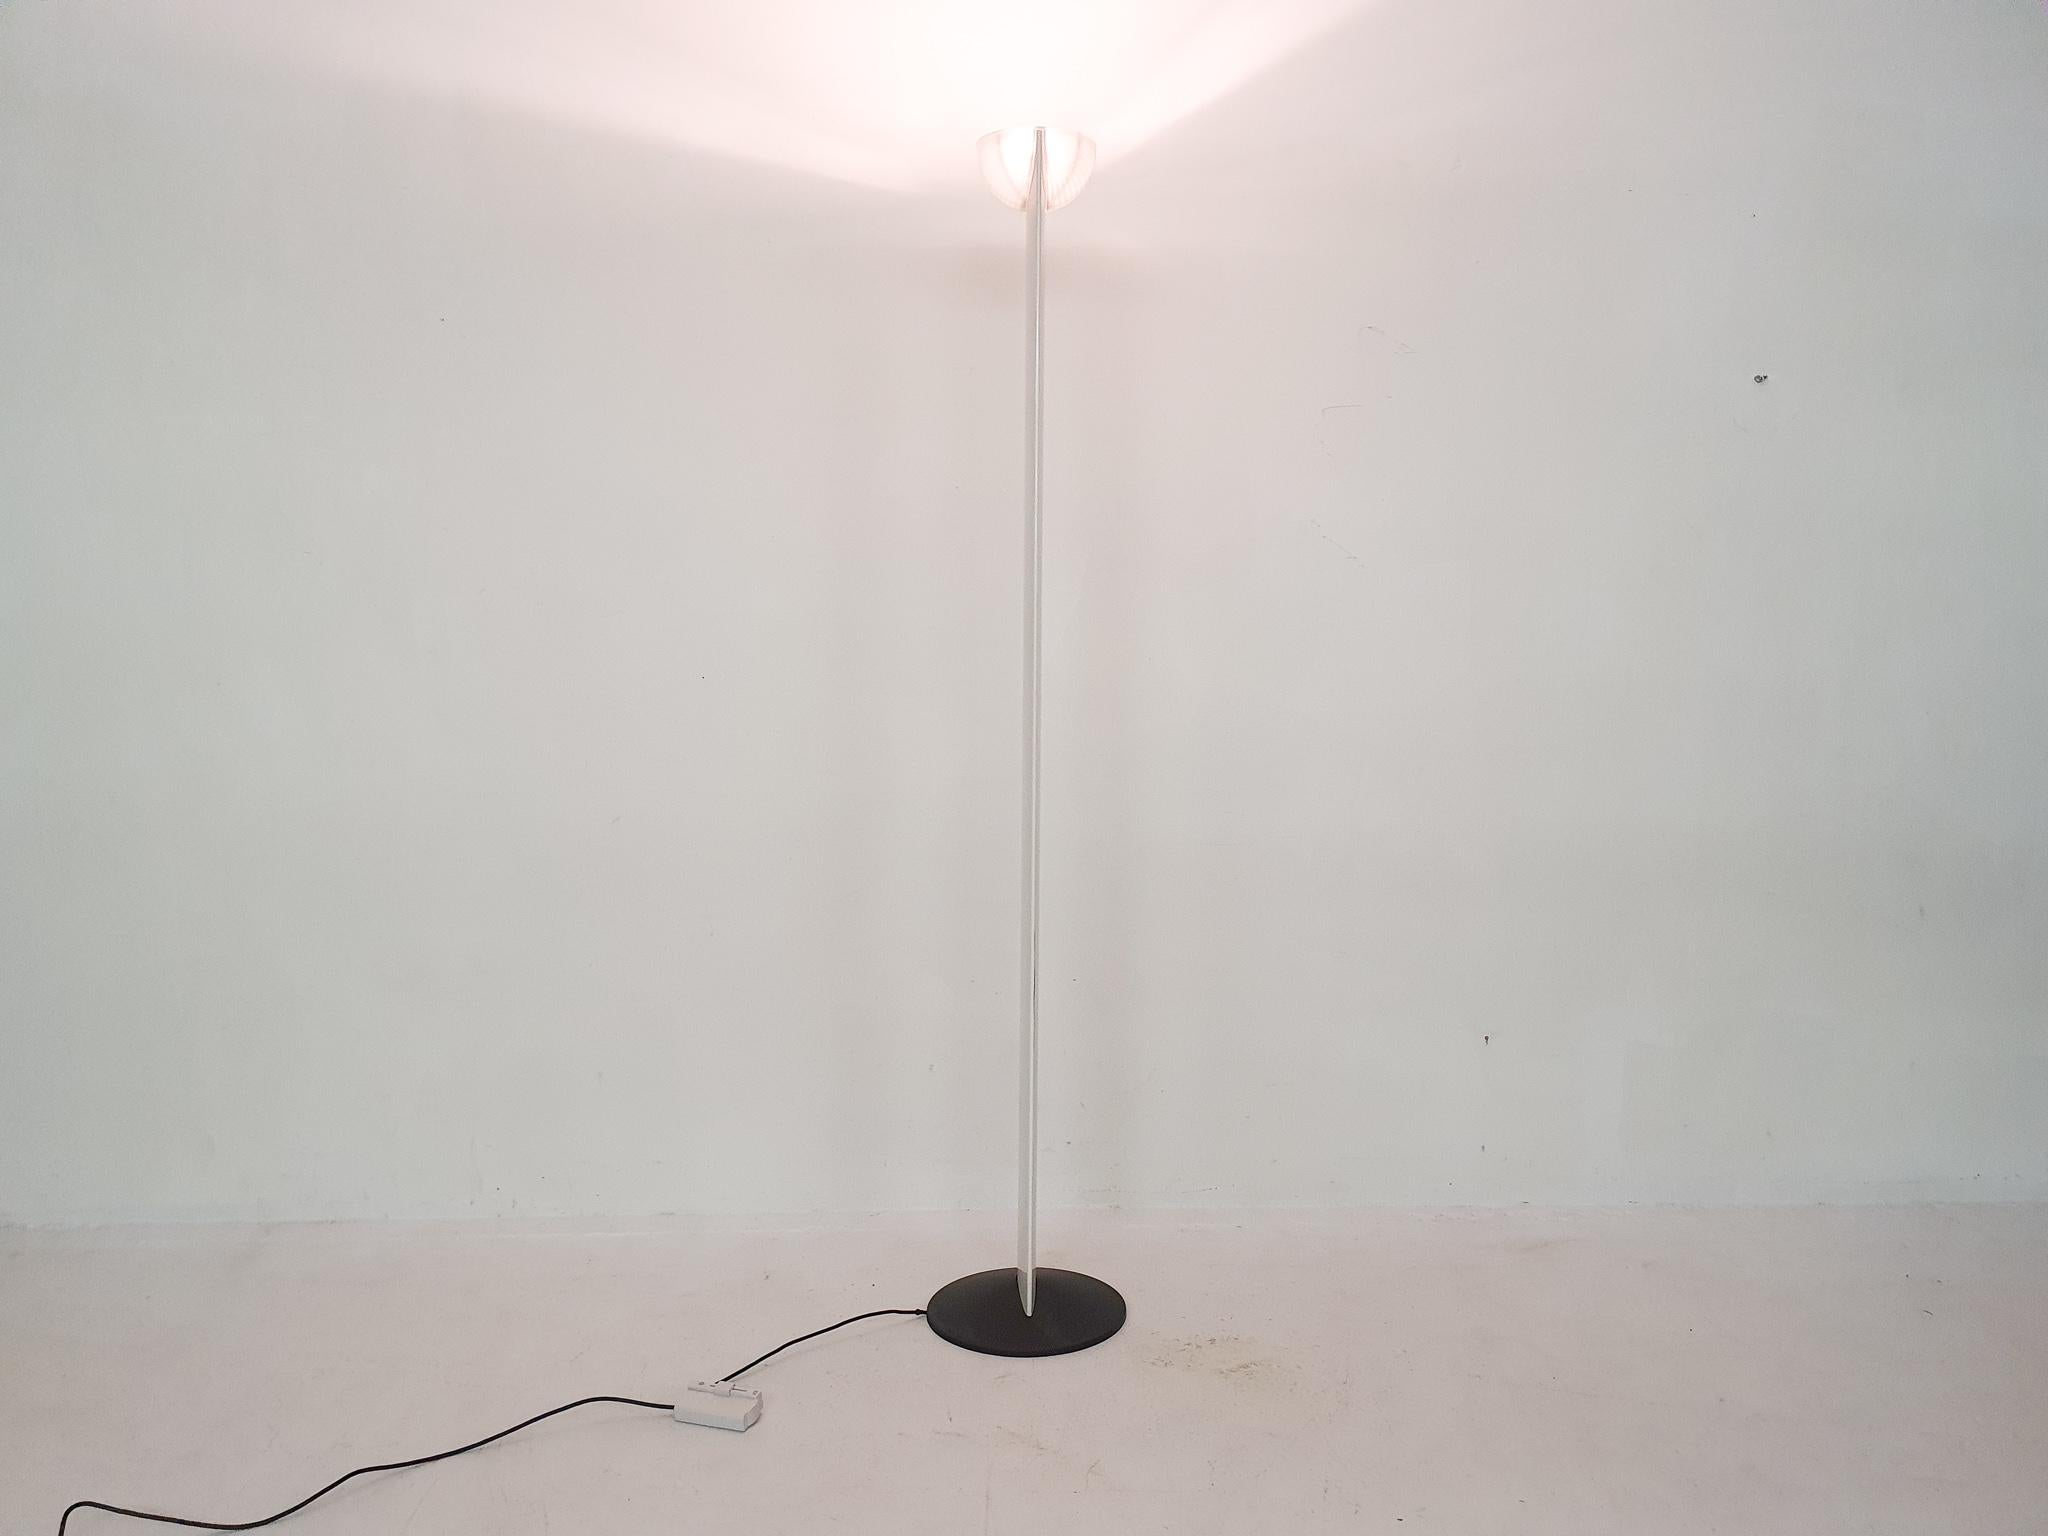 Large metal floor lamp with silver glass lamp shade and dimmable halogene light.
Gianfranco Frattini was an Italian architect and designer. He started working for himself after having worked with Gio Ponti, who was his mentor and teacher in his